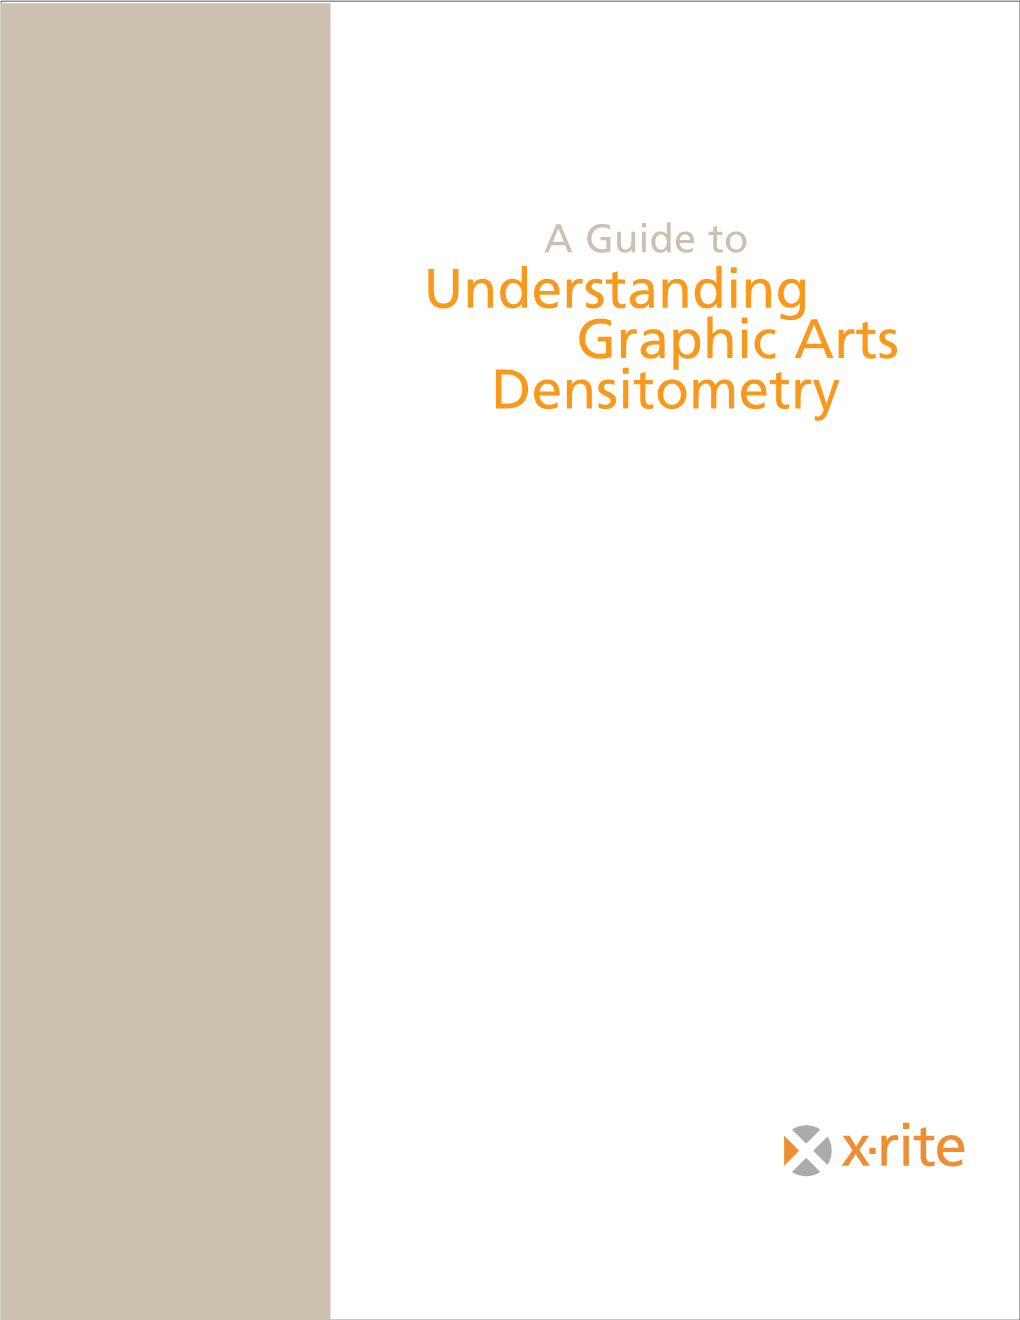 Understanding Graphic Arts Densitometry Table of Contents